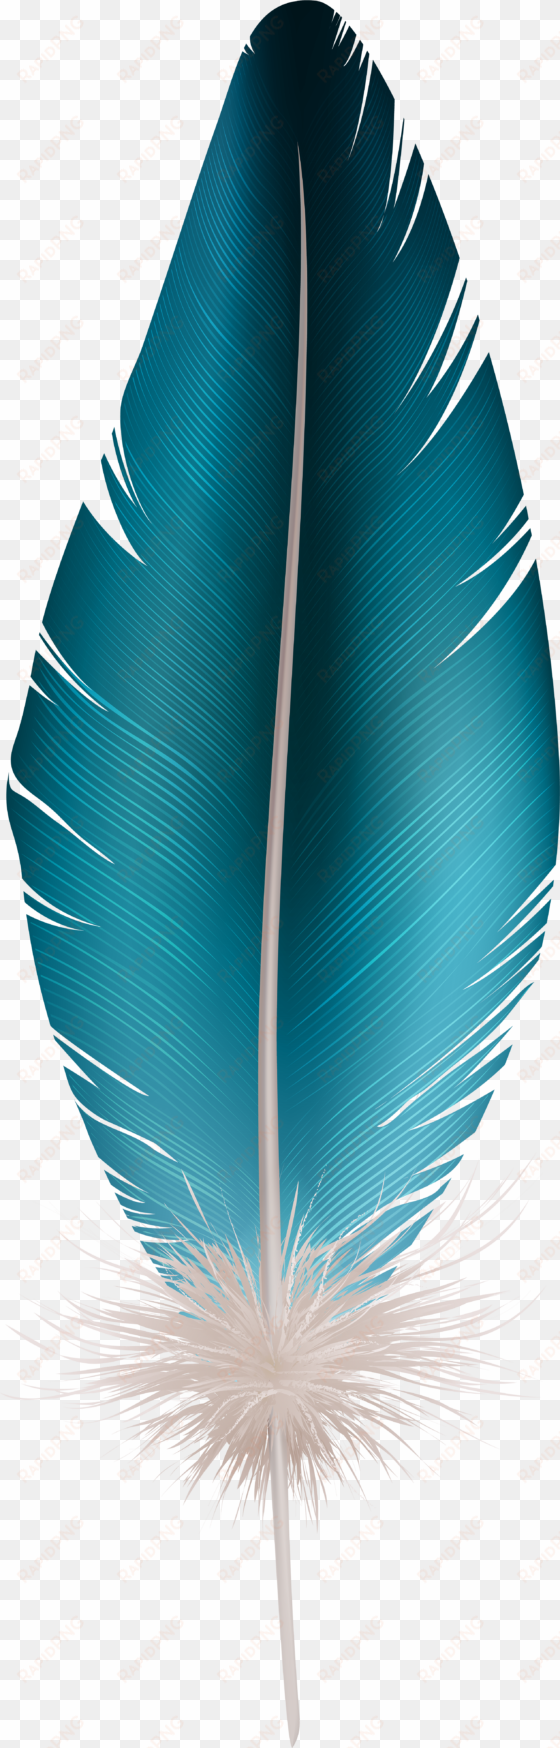 feather blue clip art image gallery yopriceville high